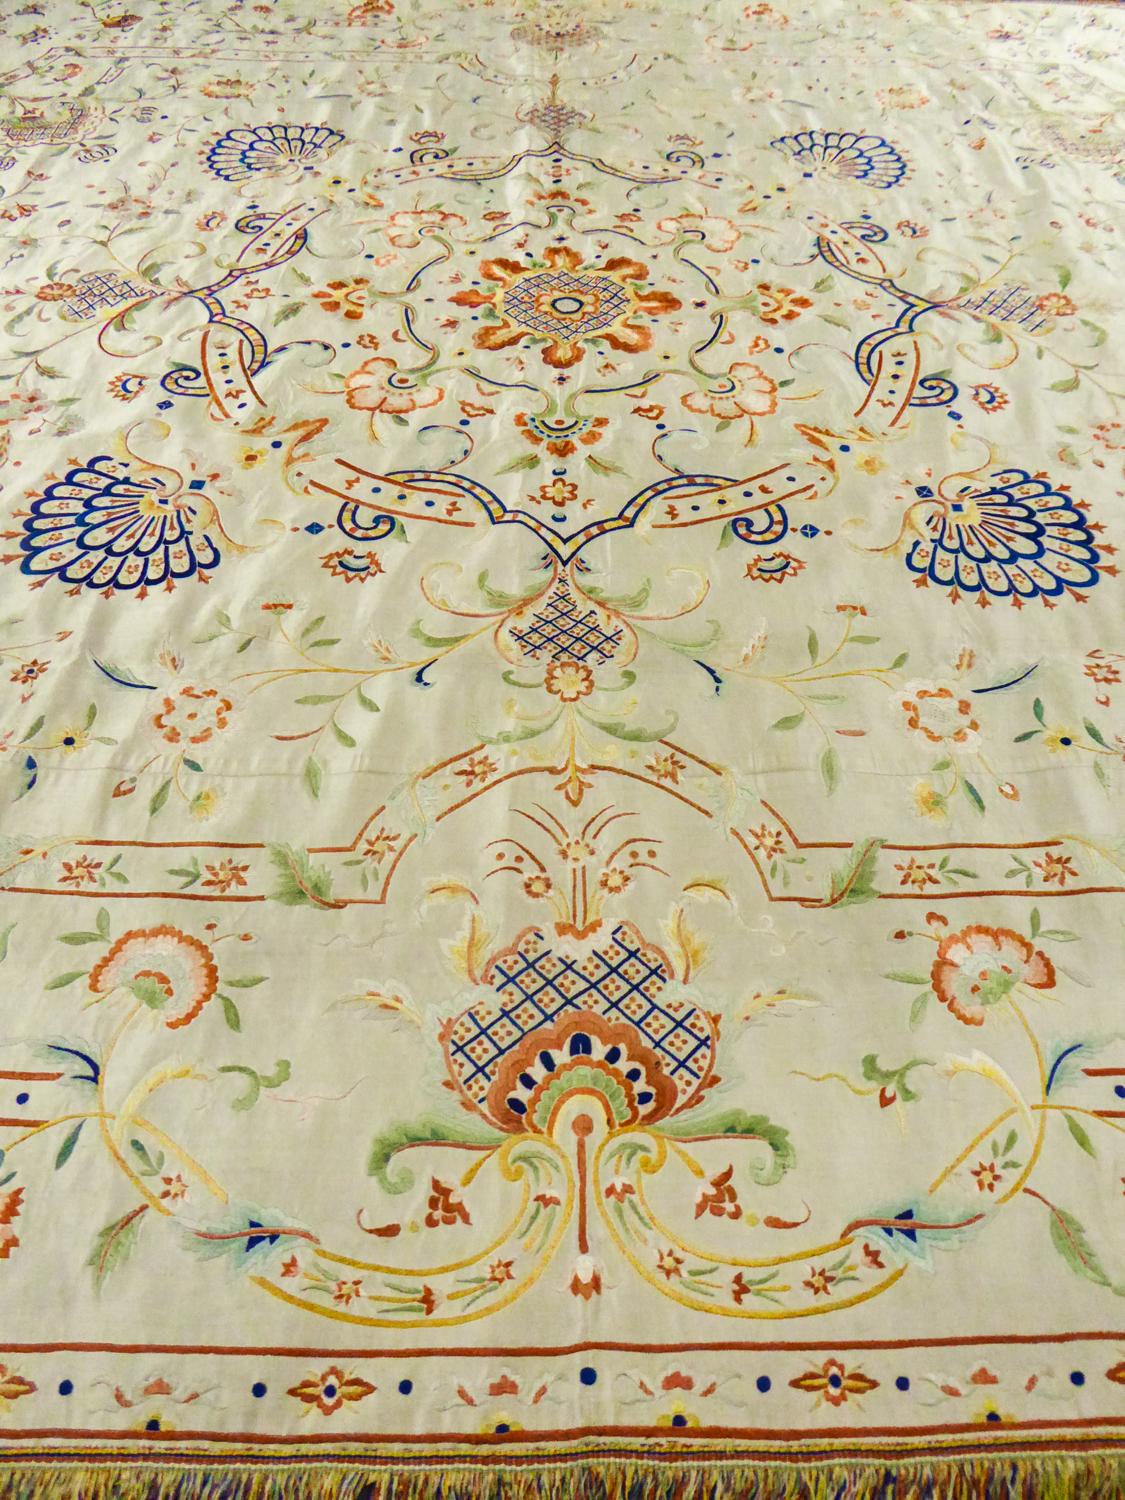 Women's or Men's A Chinese / Canton Satin Embroidered Bedspread For Export To Europe Circa 1780/ For Sale